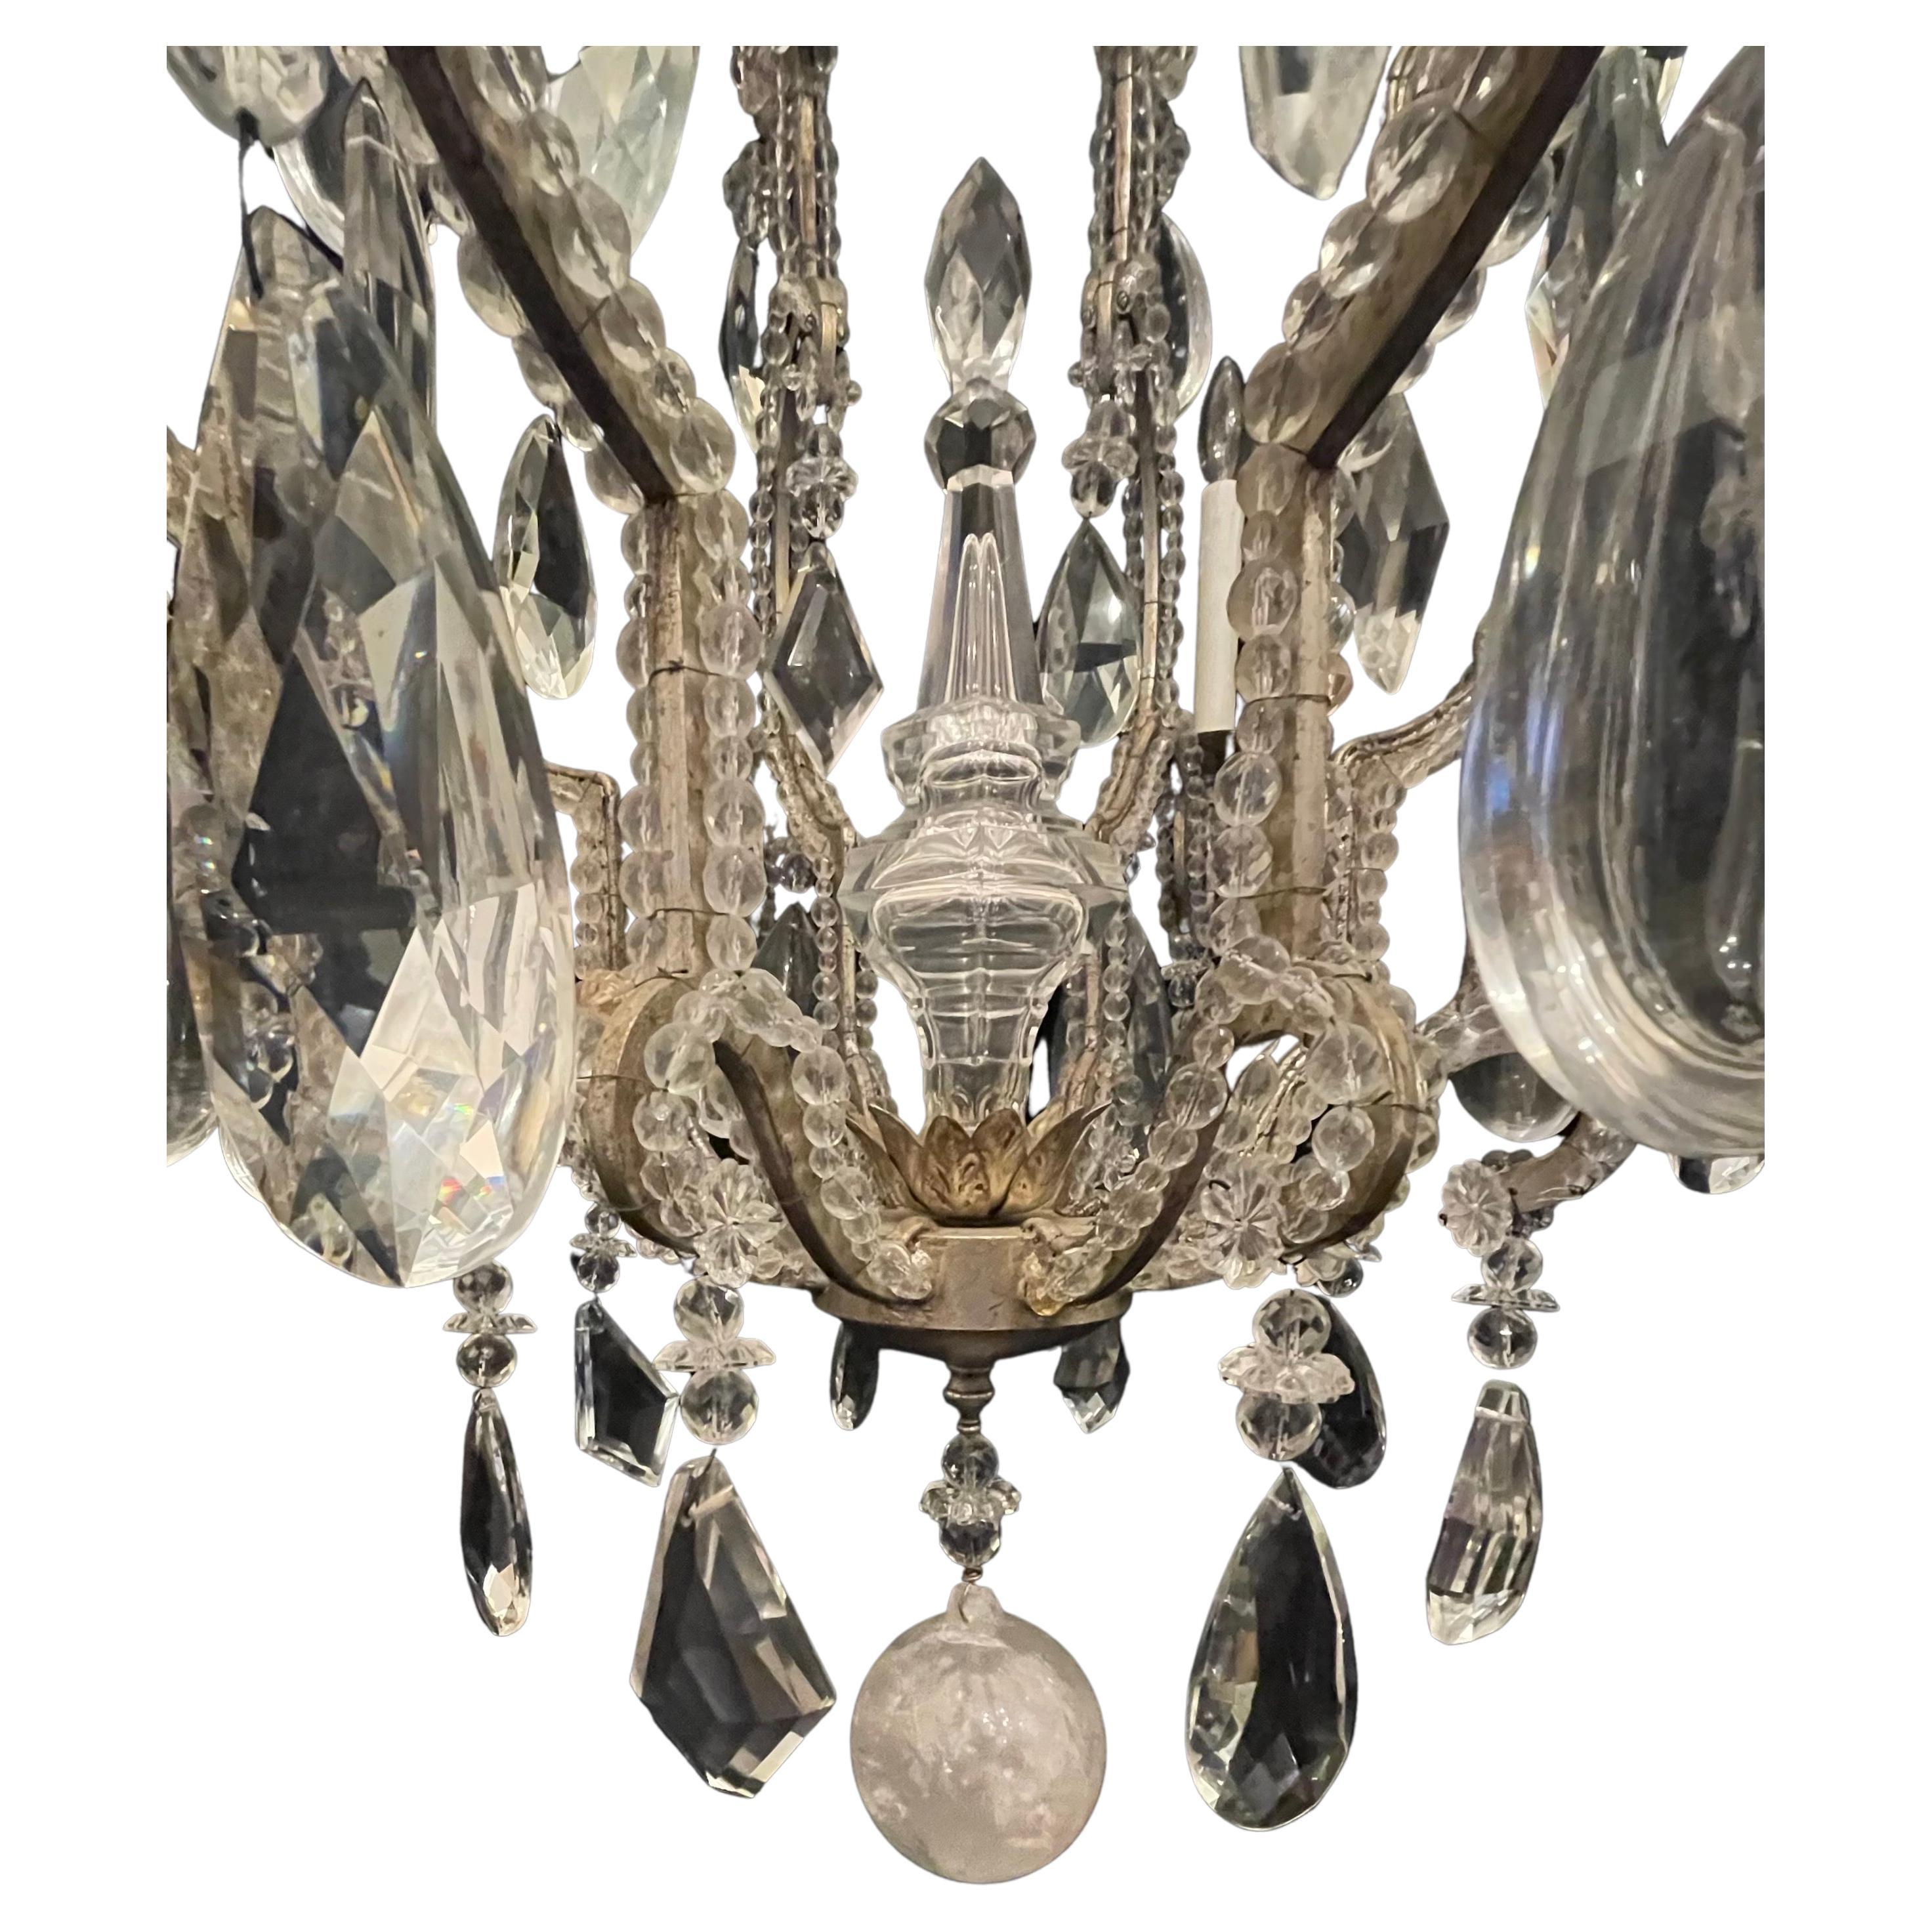 A Wonderful Mid-Century Modern Maison Baguès Style silver gilt with beaded french bird cage form body having alternating rock crystal and multi dimensional crystals through out, this large chandelier has 8 candelabra lights surrounding the outside